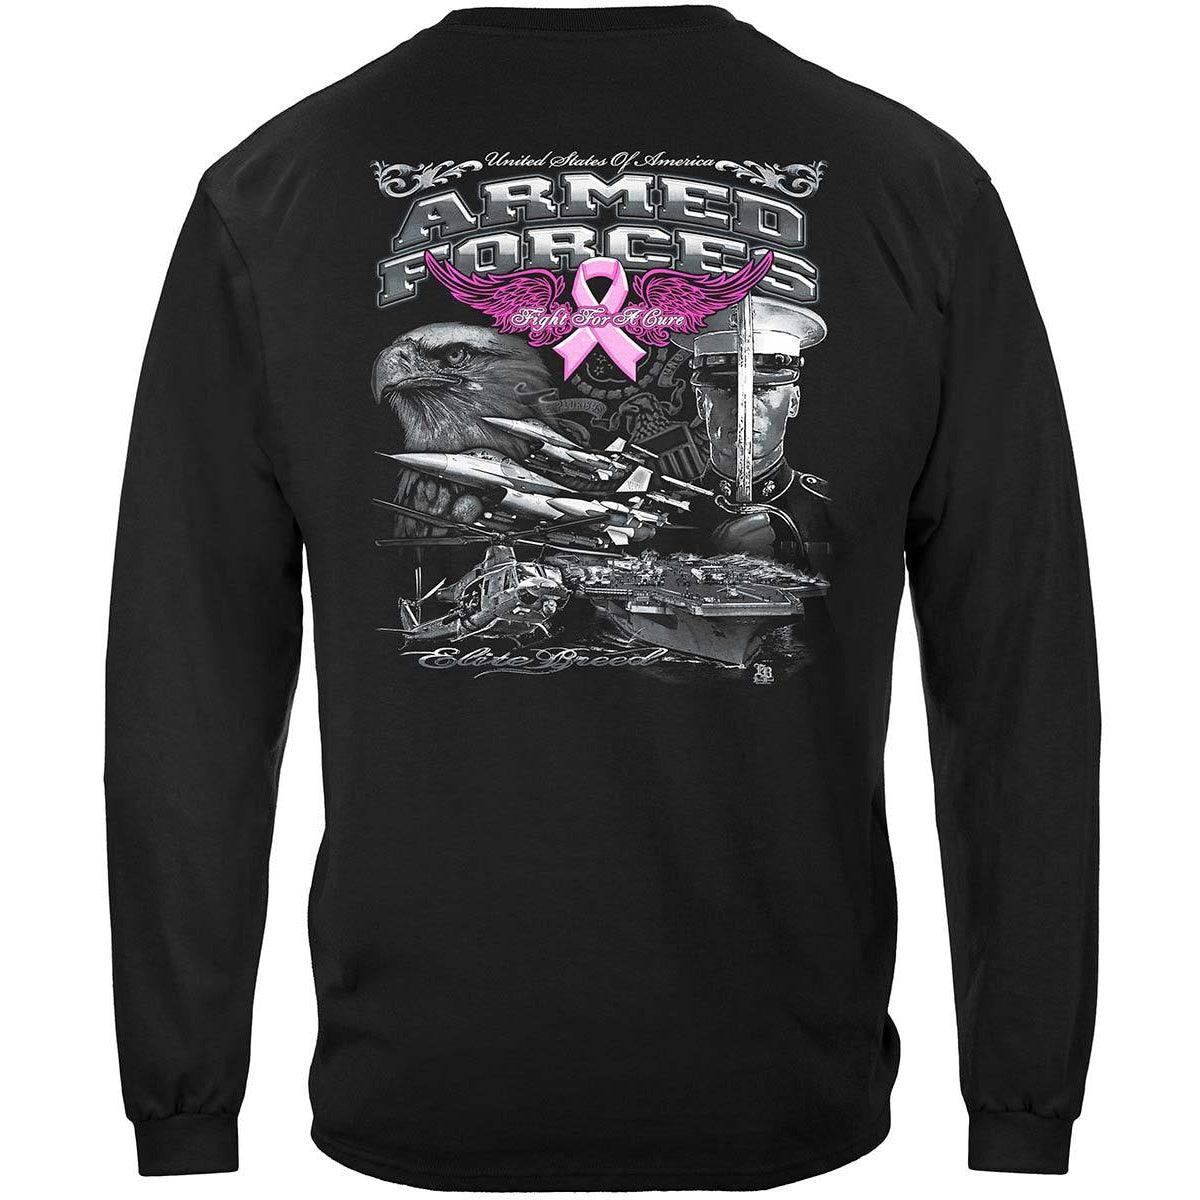 Armed Forces Elite Breed Breast Cancer Awareness Long Sleeve - Military Republic